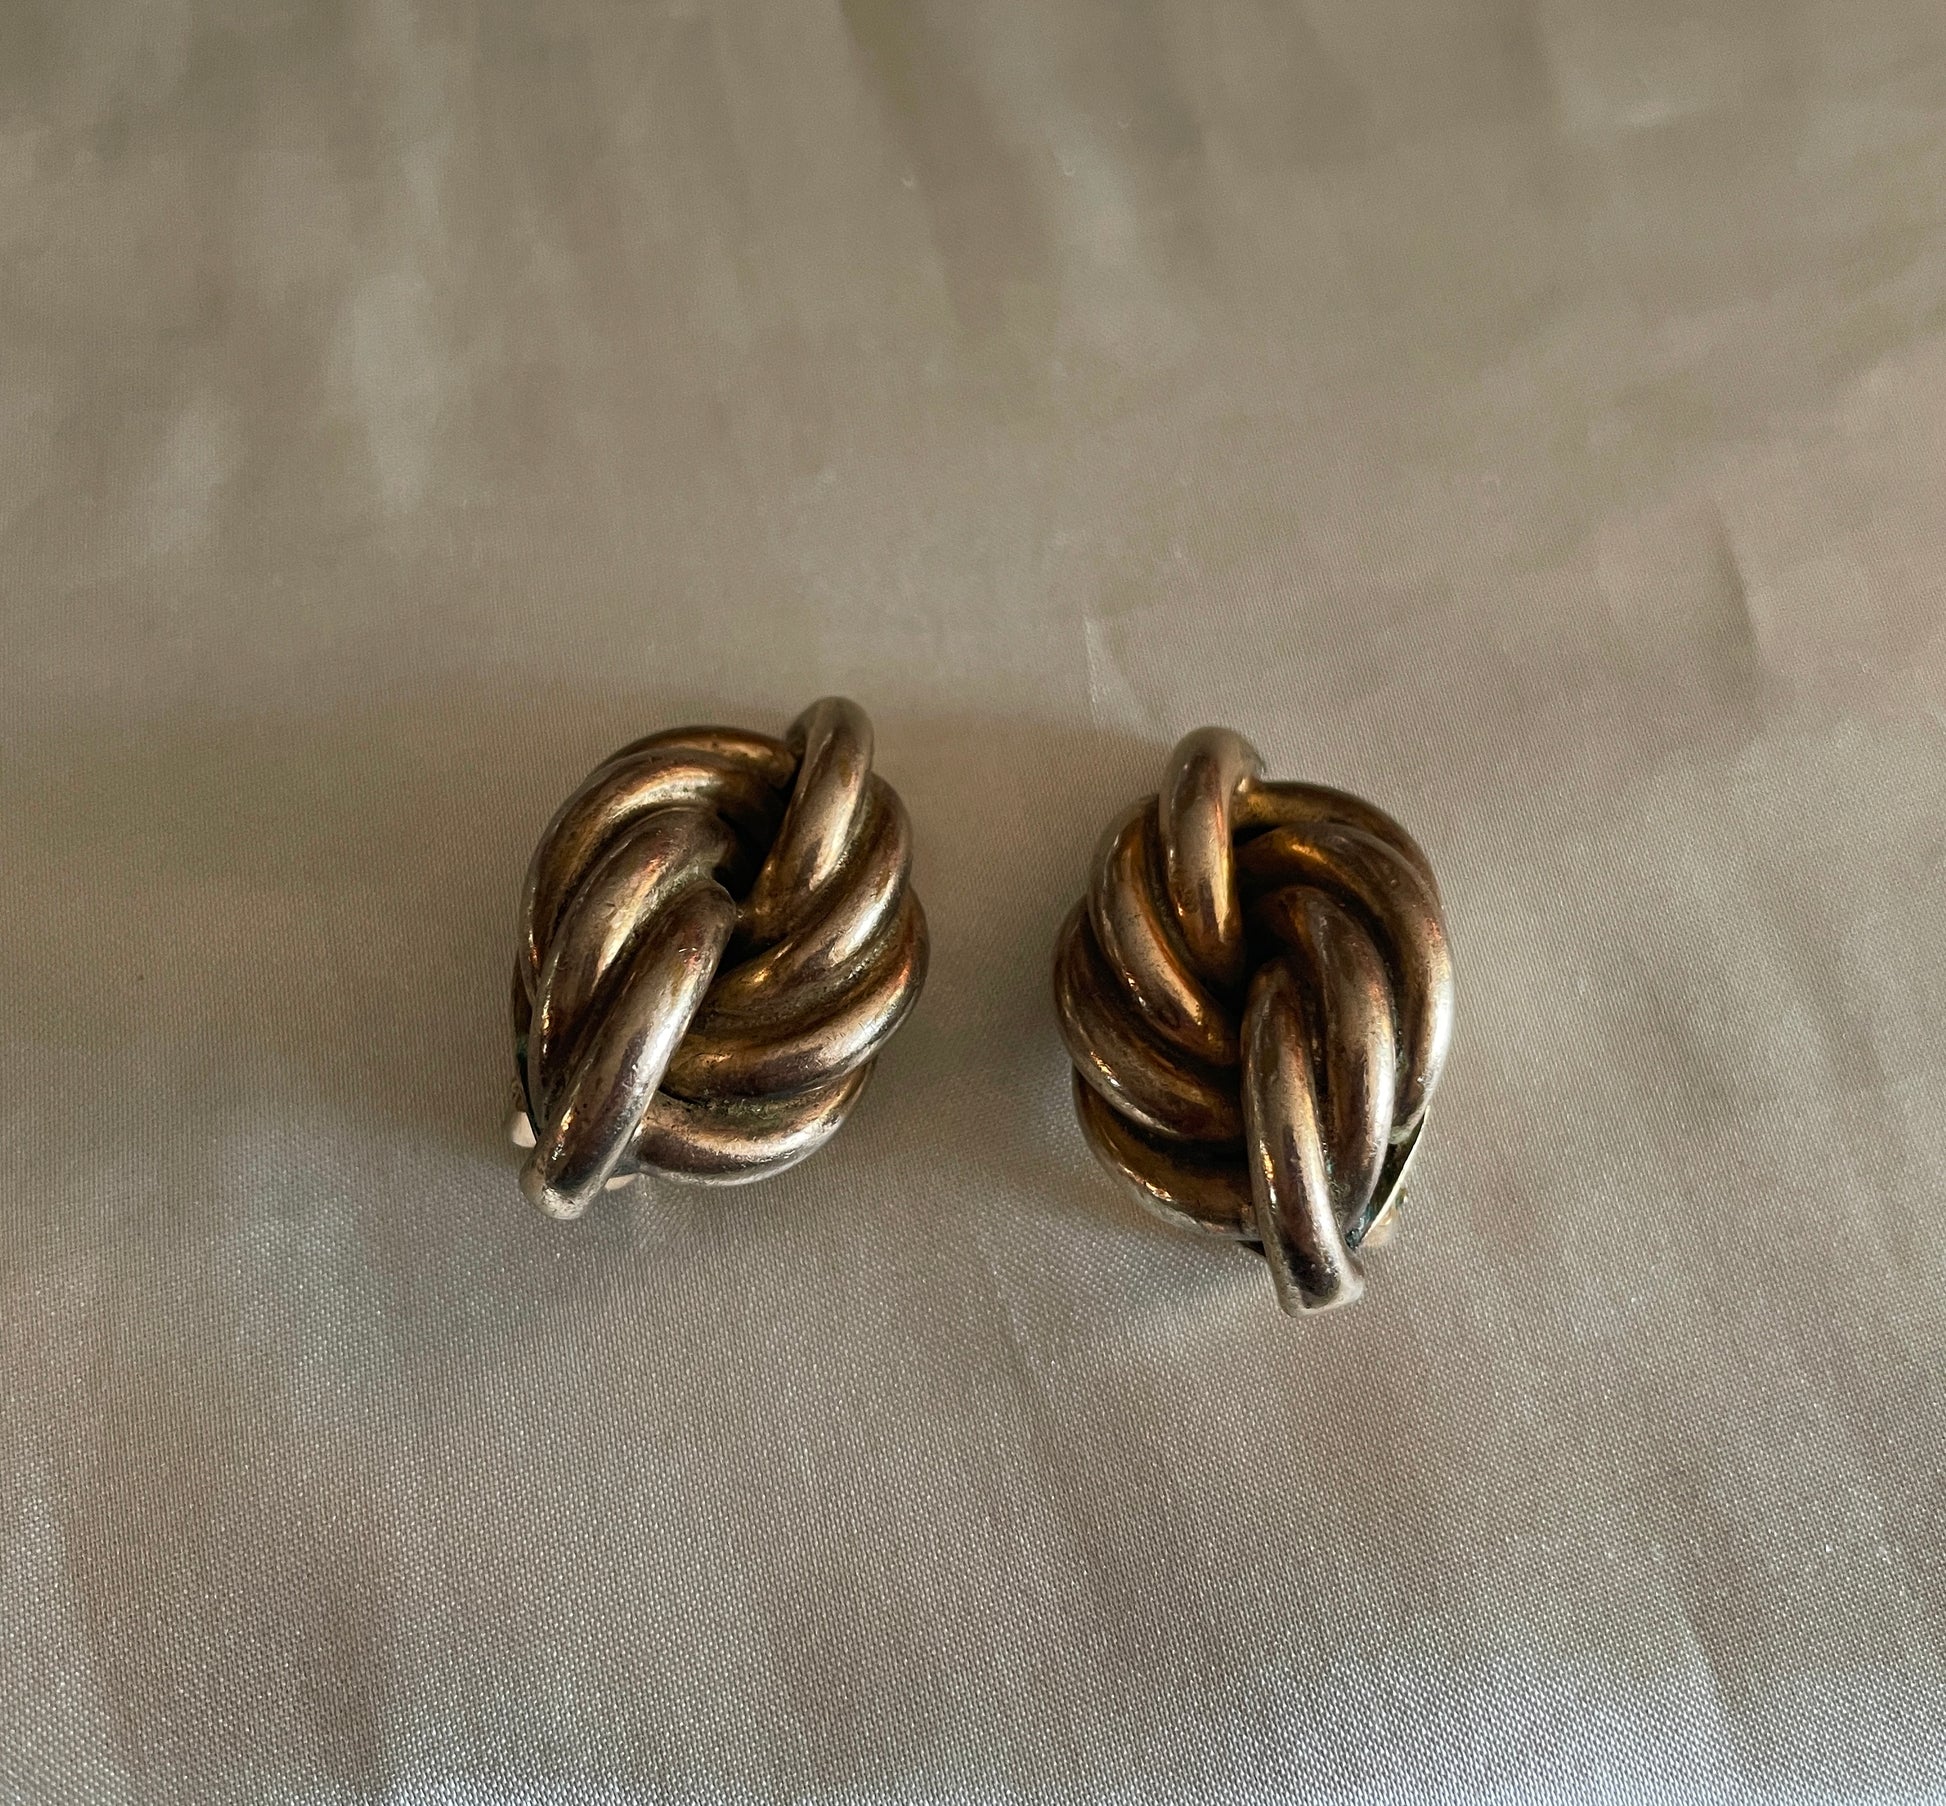 1980s clip earrings  Signed Marino 80s Brass Tone Twisted Knot Clip Vintage Earrings